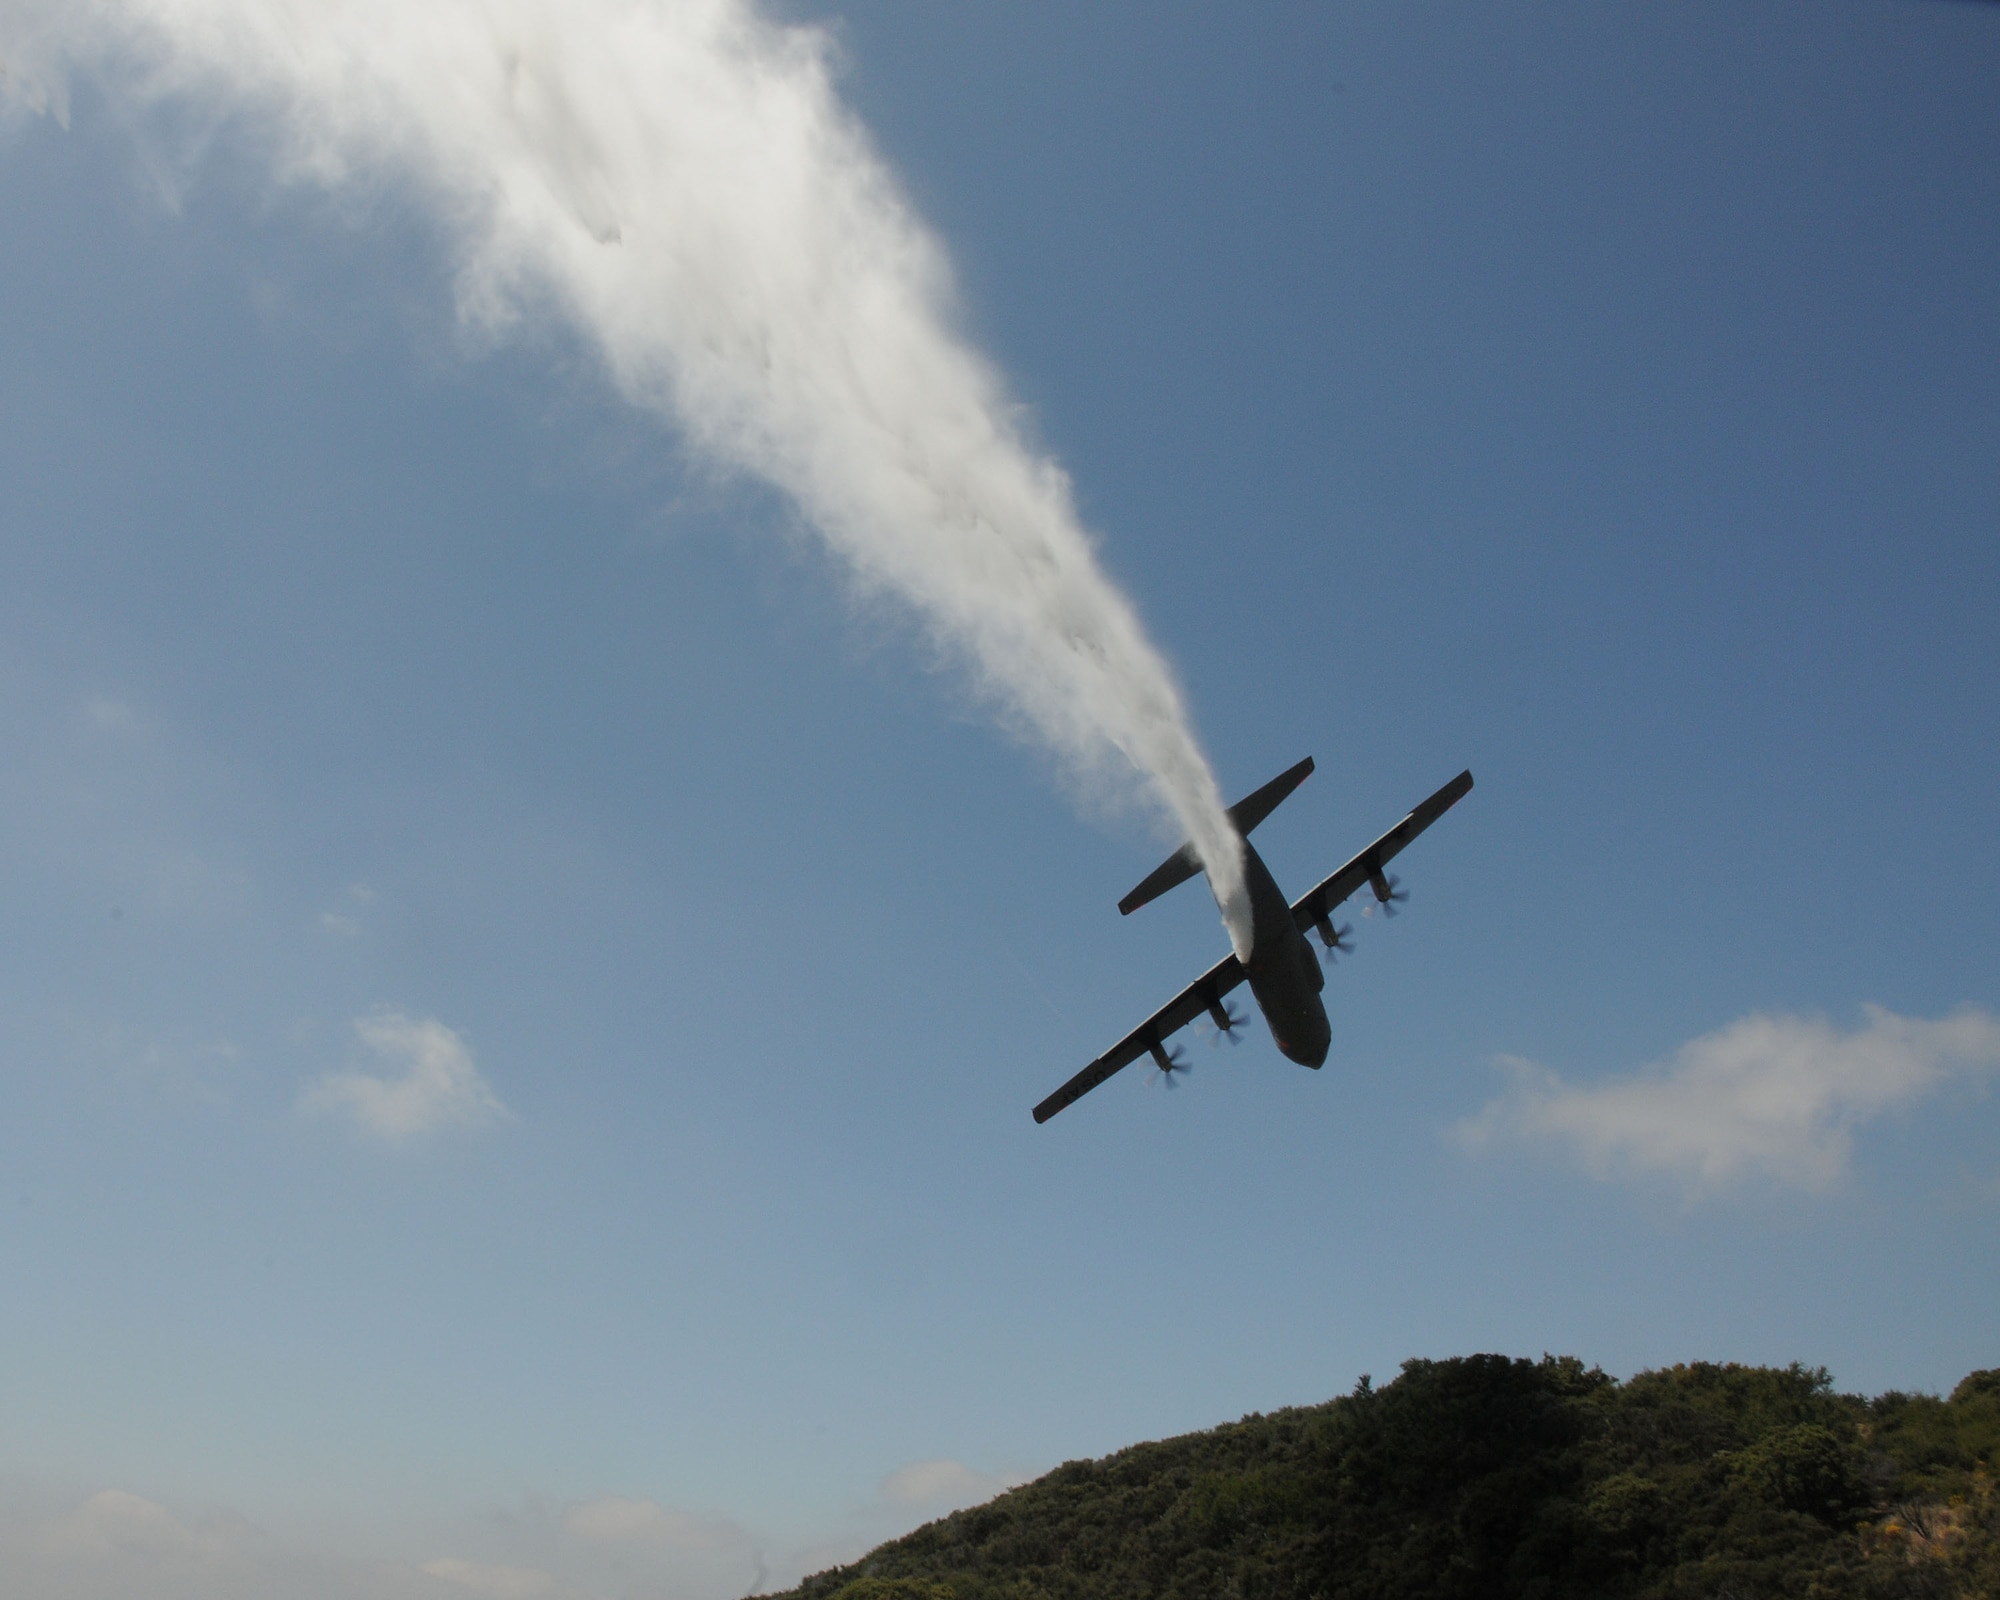 A C-130J from the 146th Airlift Wing, California Air National Guard, drops water over the Angeles Forest during Modular Airborne Firefighting System (MAFFS) training held June 7, 2011. The aircrews follow a U.S. Forest Service lead plane and demonstrate proficiency by dropping over a designated area. (Photo by Master Sgt. Dave Buttner)